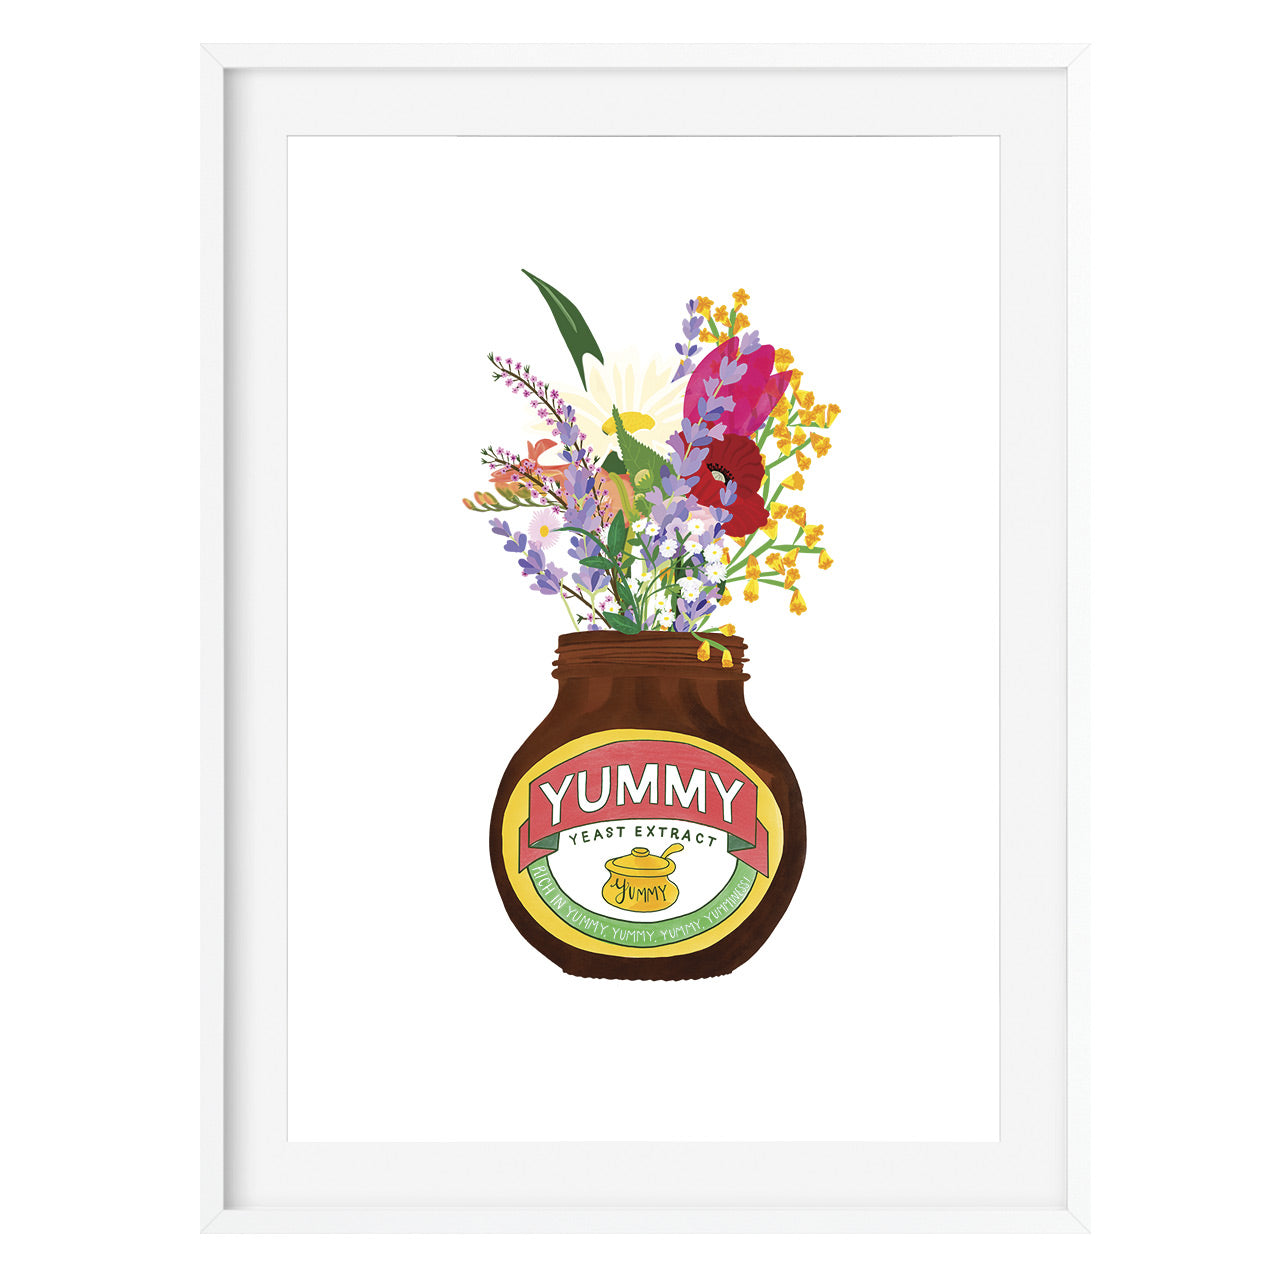 Yummy Yeast Extract Jar & Flowers Print - Poppins & Co.